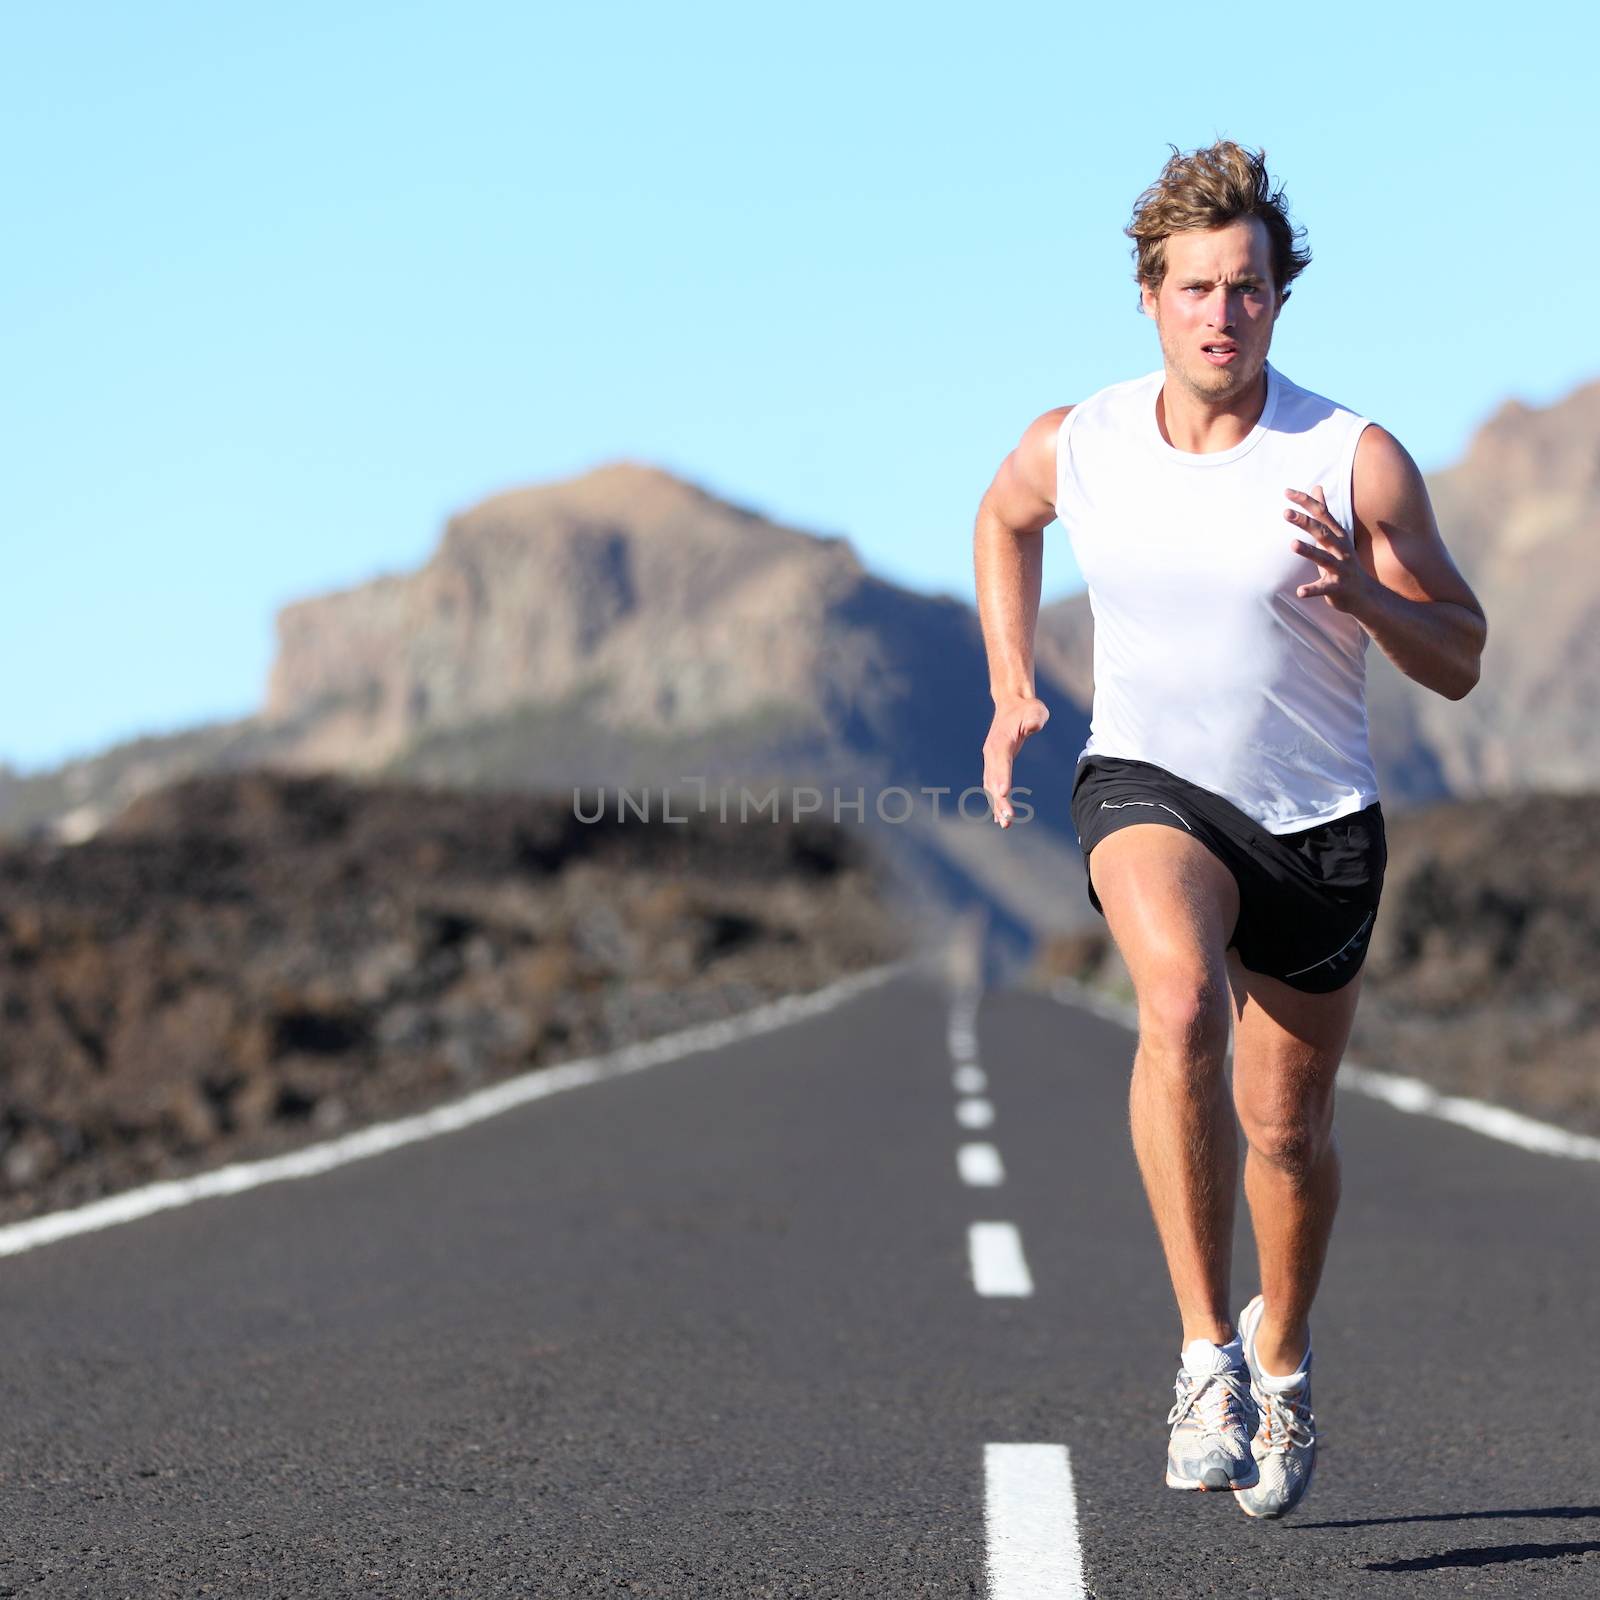 Runner running for Marathon on road in beautiful mountain landscape. Caucasian man jogging outdoors in nature.